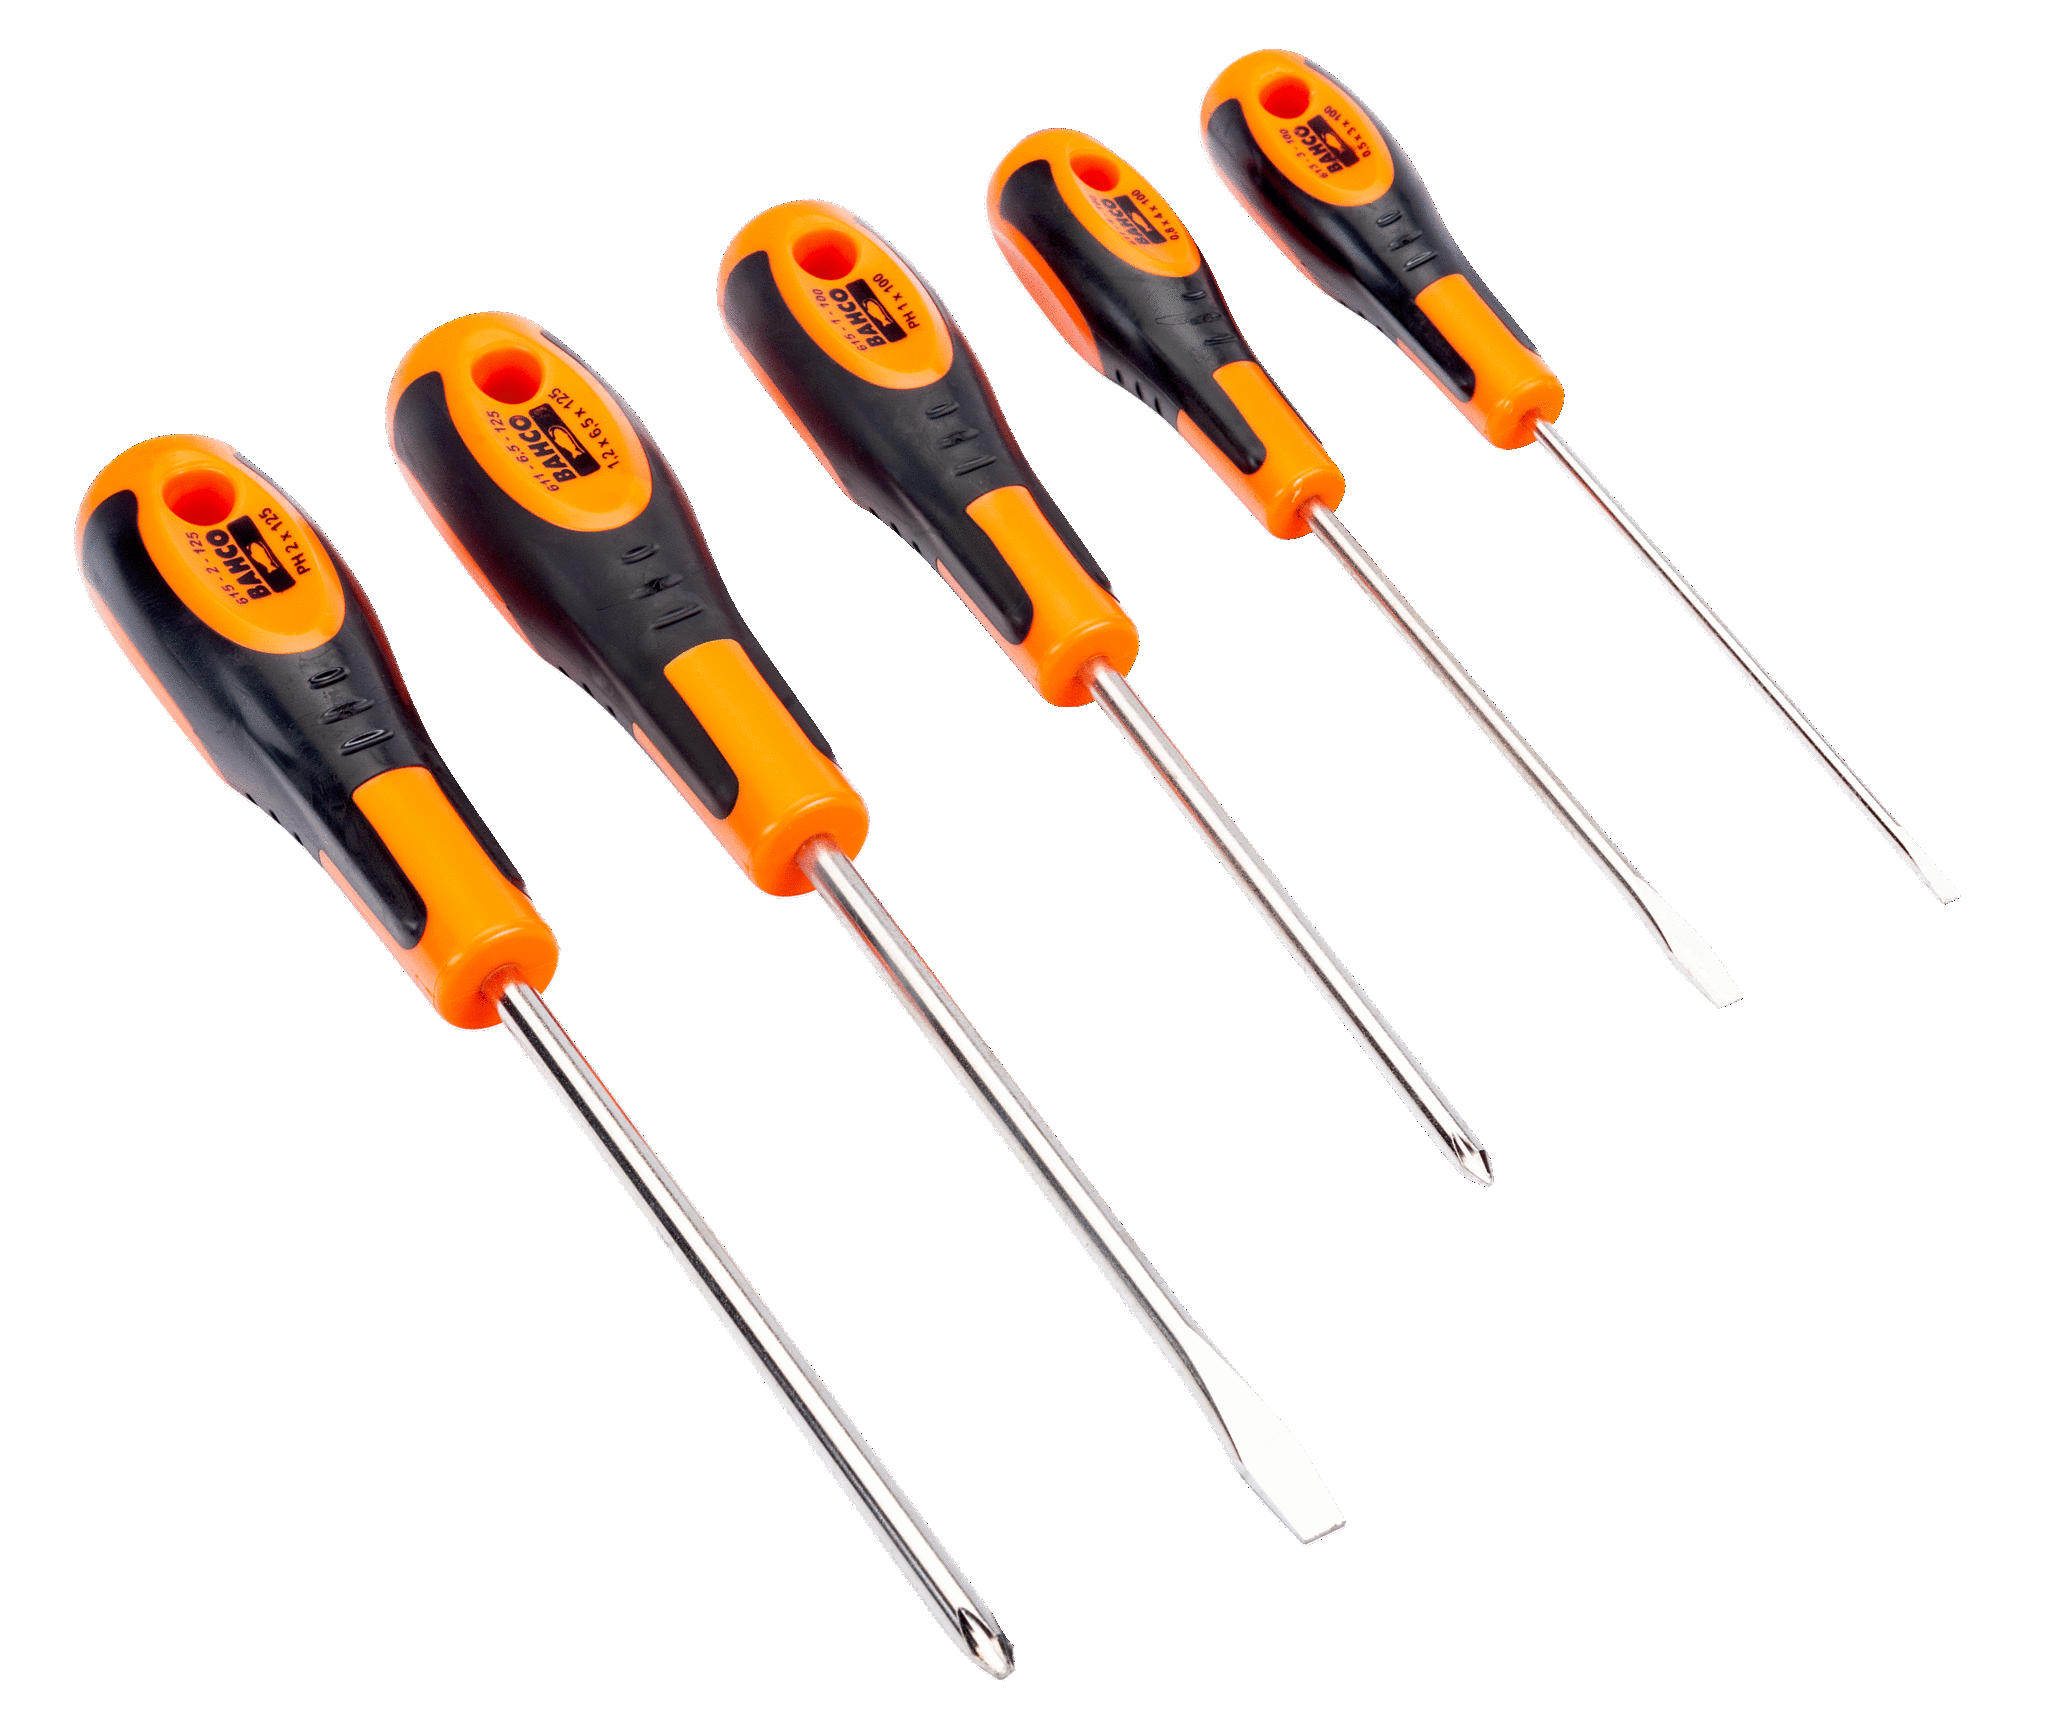 two-color small handle screwdriver Buspoll small screwdriver set Phillips screwdriver and flat head screwdriver 